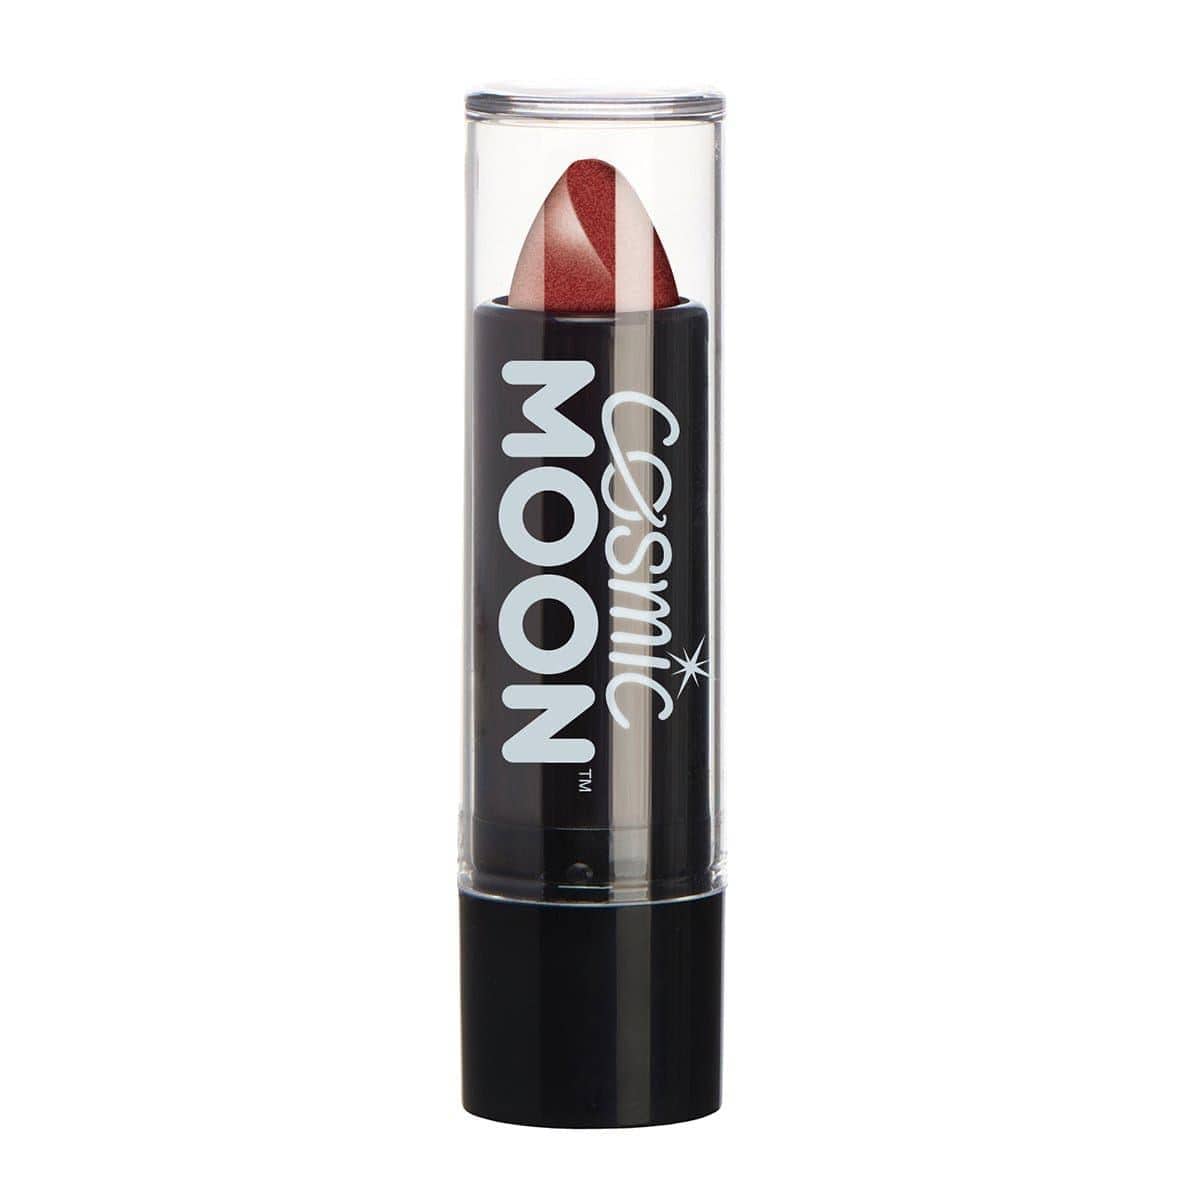 Buy Costume Accessories Moon red metallic lipstick sold at Party Expert